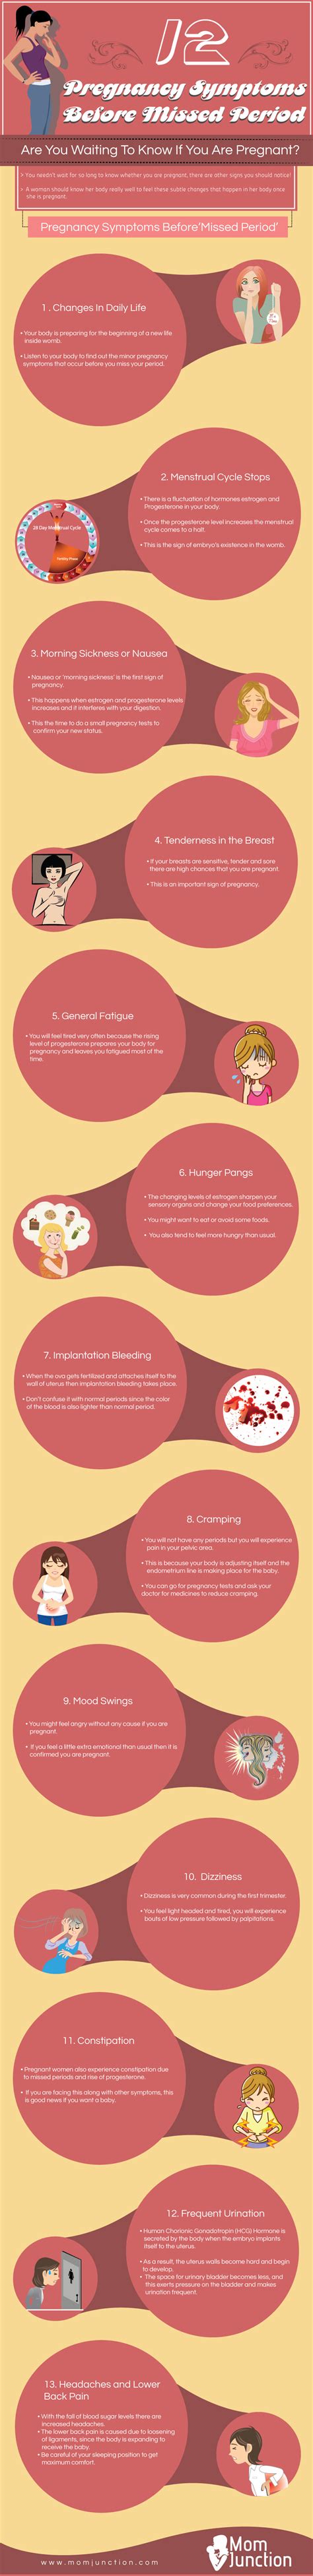 The early sign of pregnancy is a missed menstrual period. 12 Pregnancy Symptoms Before Missed Period #infographic ...